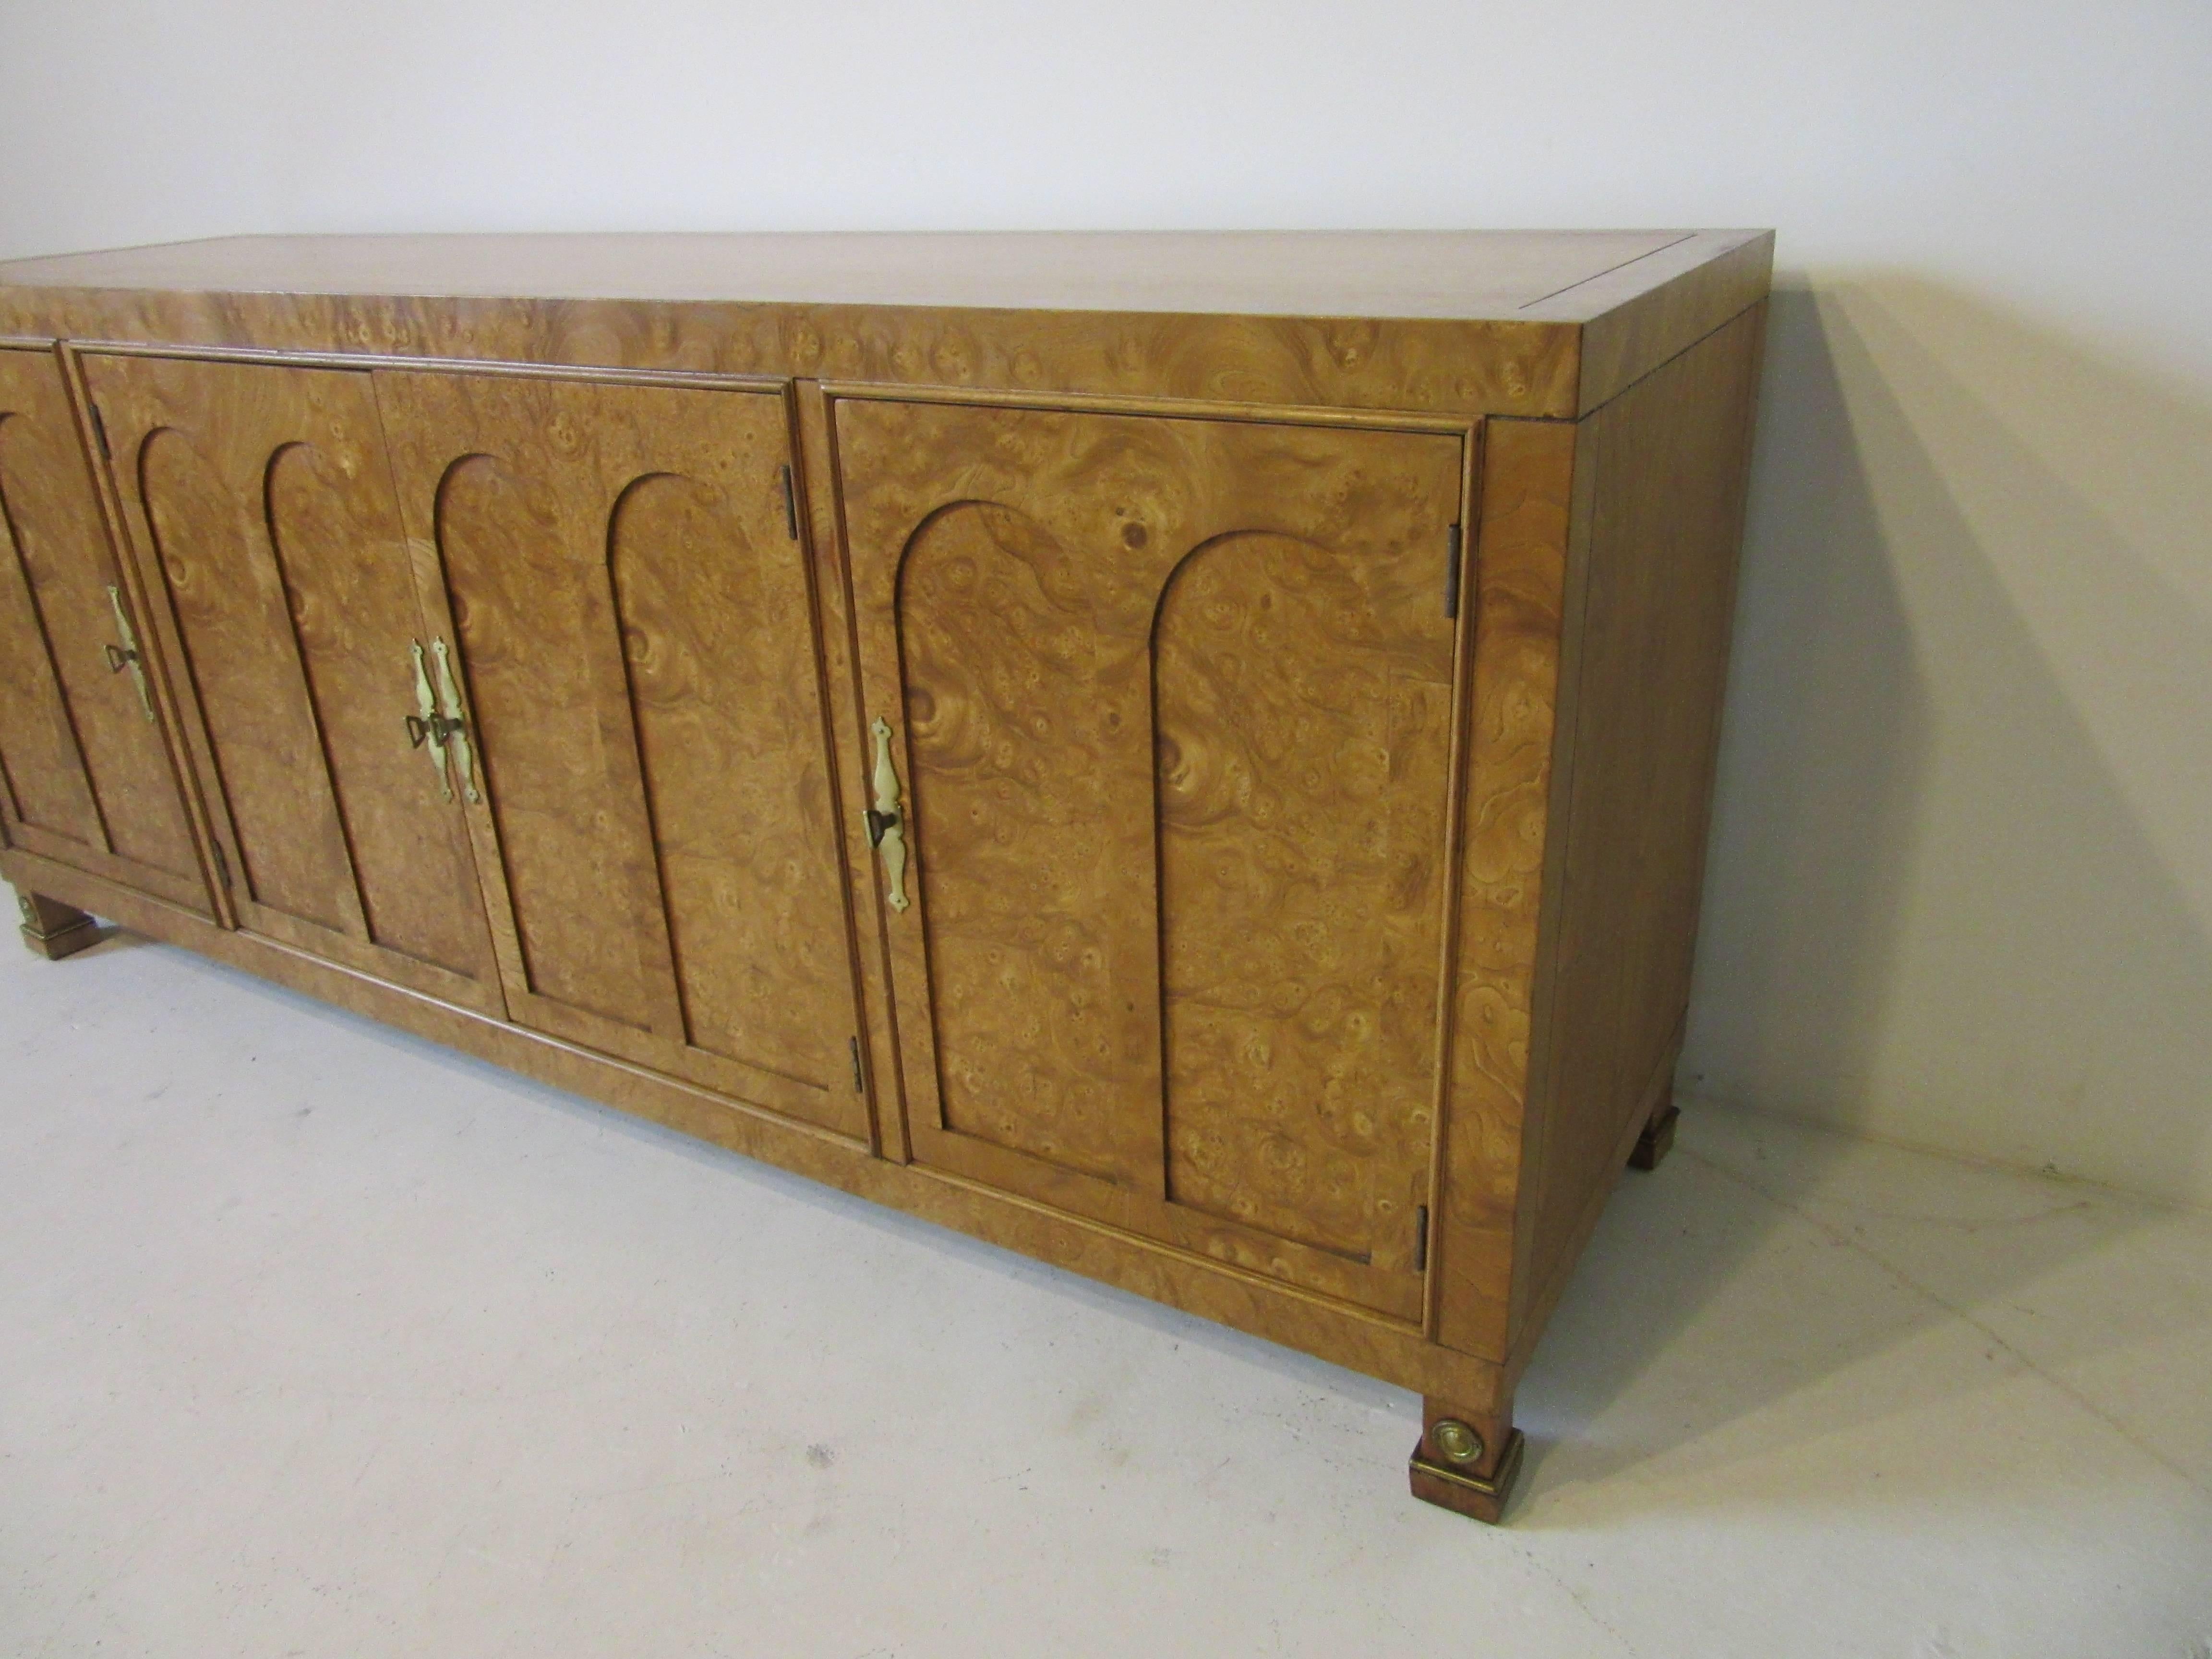 American Mastercraft Burl Wood Credenza or Server in the Style of Hollywood Regency